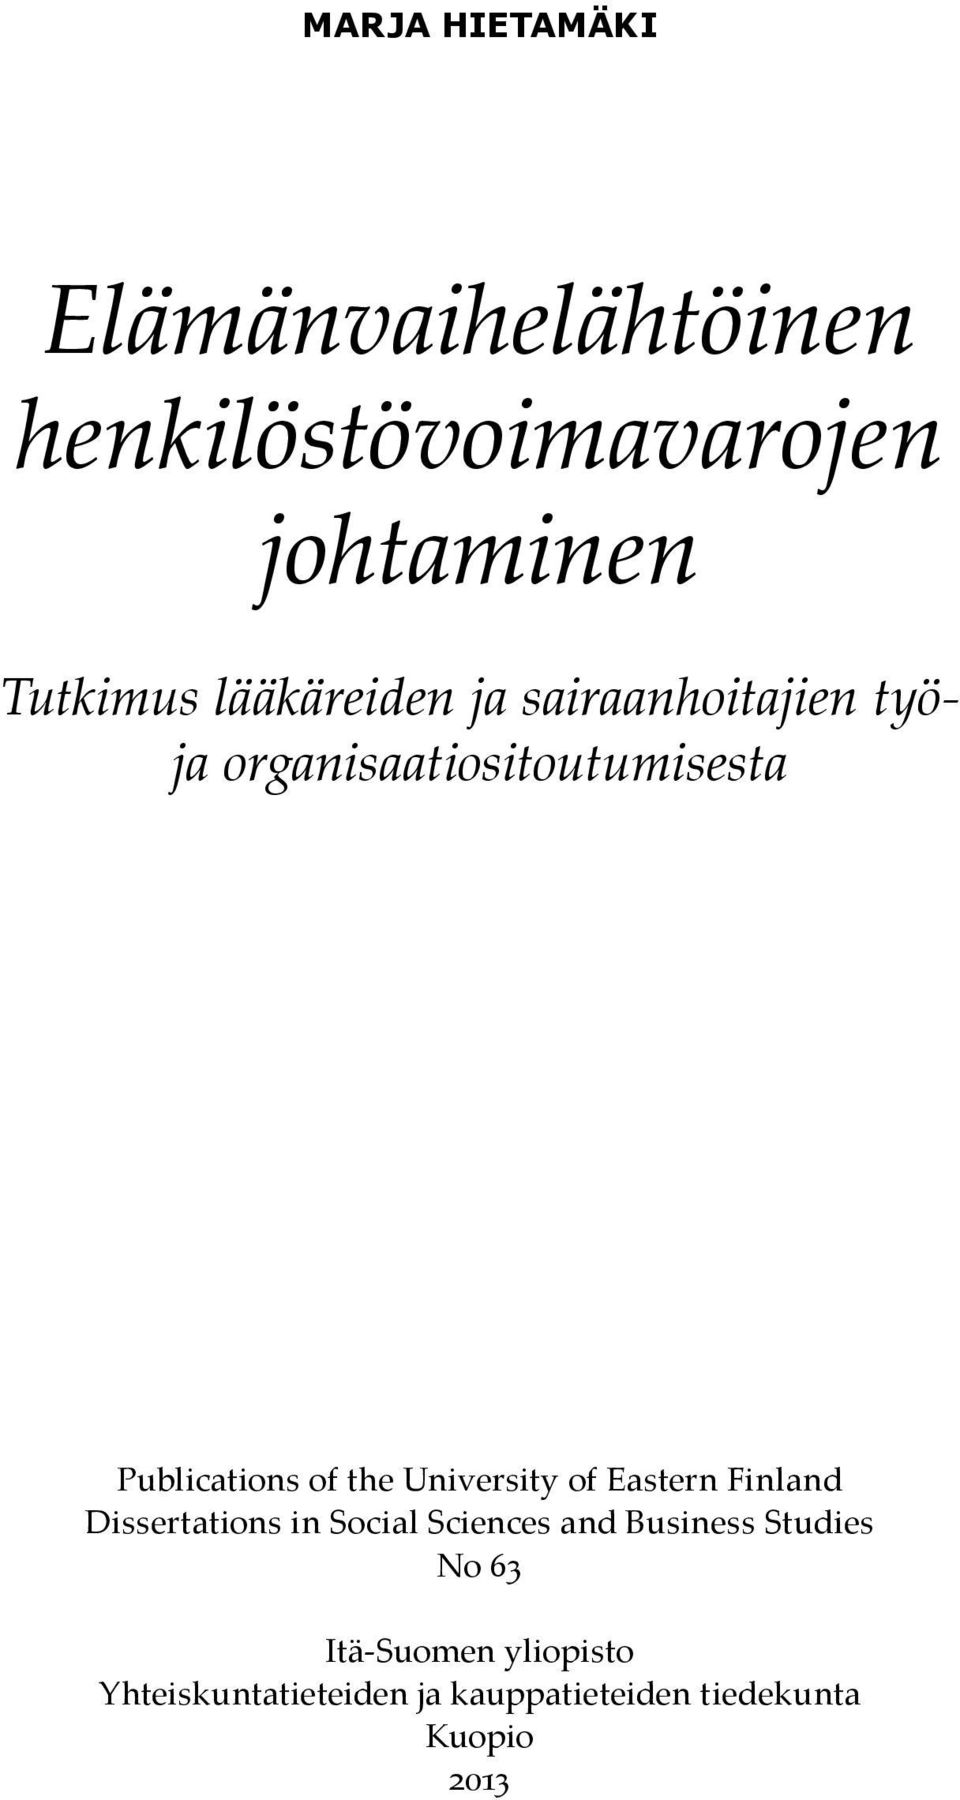 University of Eastern Finland Dissertations in Social Sciences and Business Studies